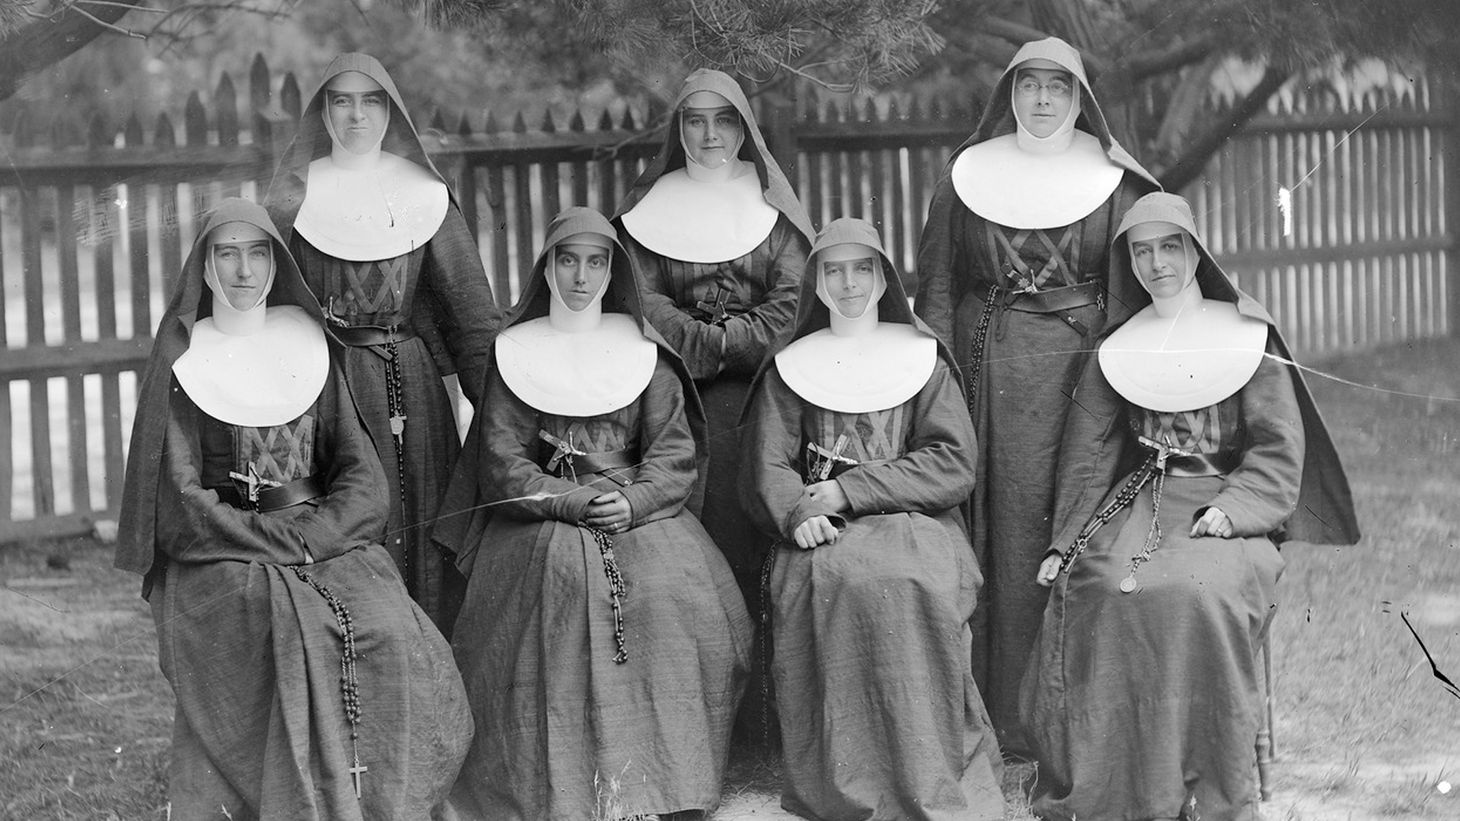 7 nuns posing for a photo. Nuns wear habits, you see – that's the link to this article.